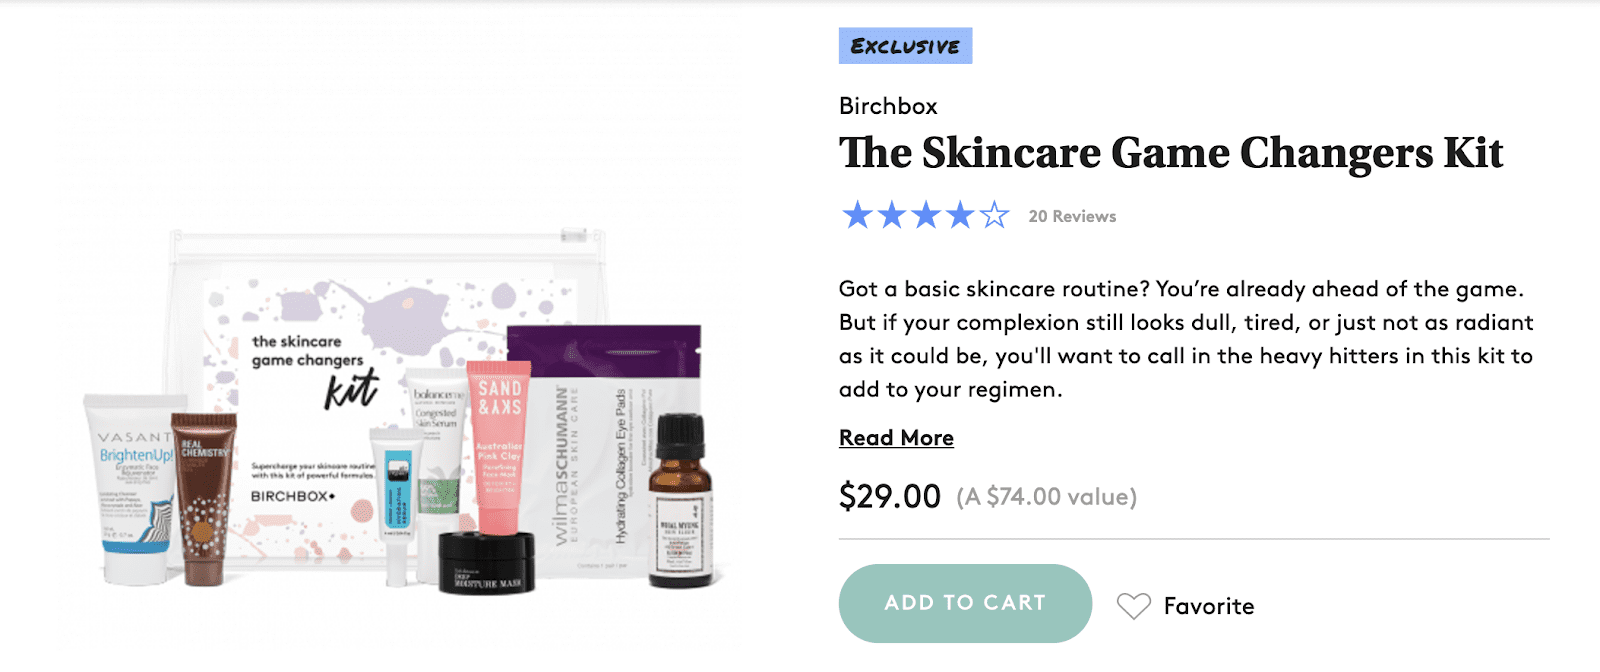 Birchbox has curated kits of subscription products